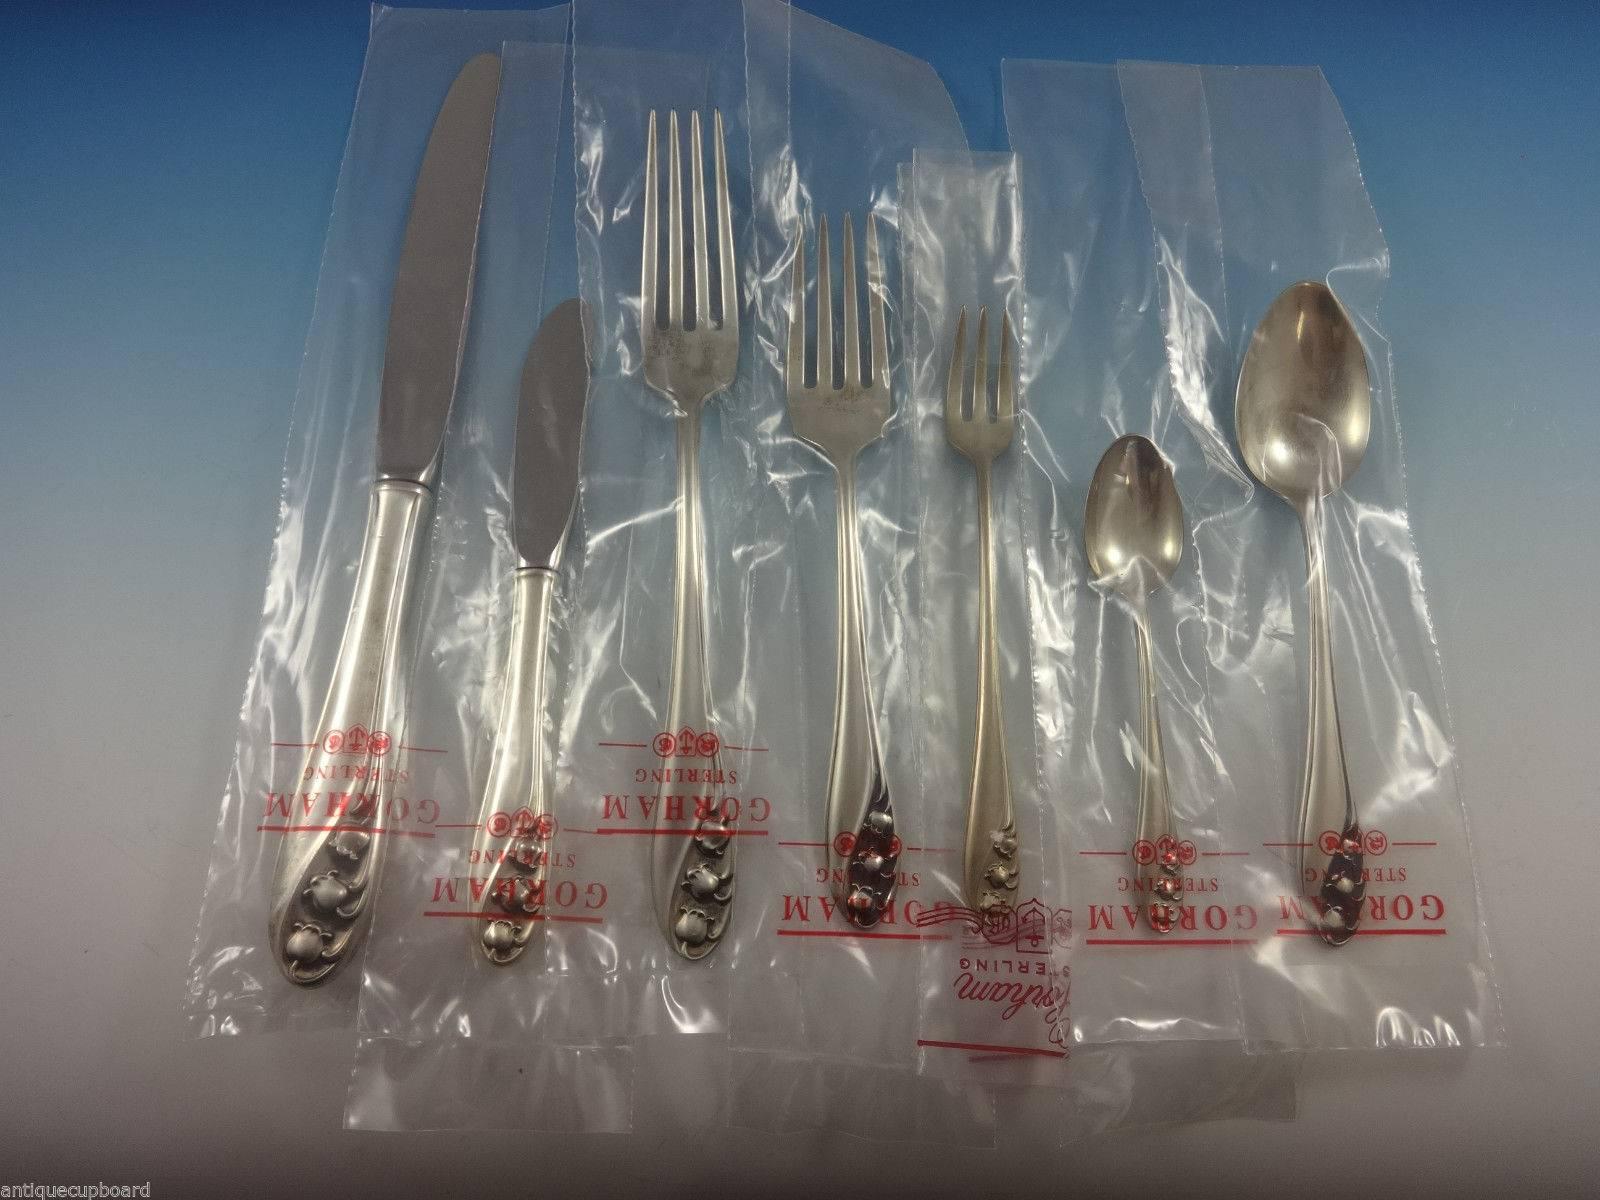 Dinner size lily of the valley by Gorham sterling silver flatware set of 62 pieces. This set appears unused, the pieces are still in the factory sleeves! This set includes: 

eight dinner size knives, 9 5/8